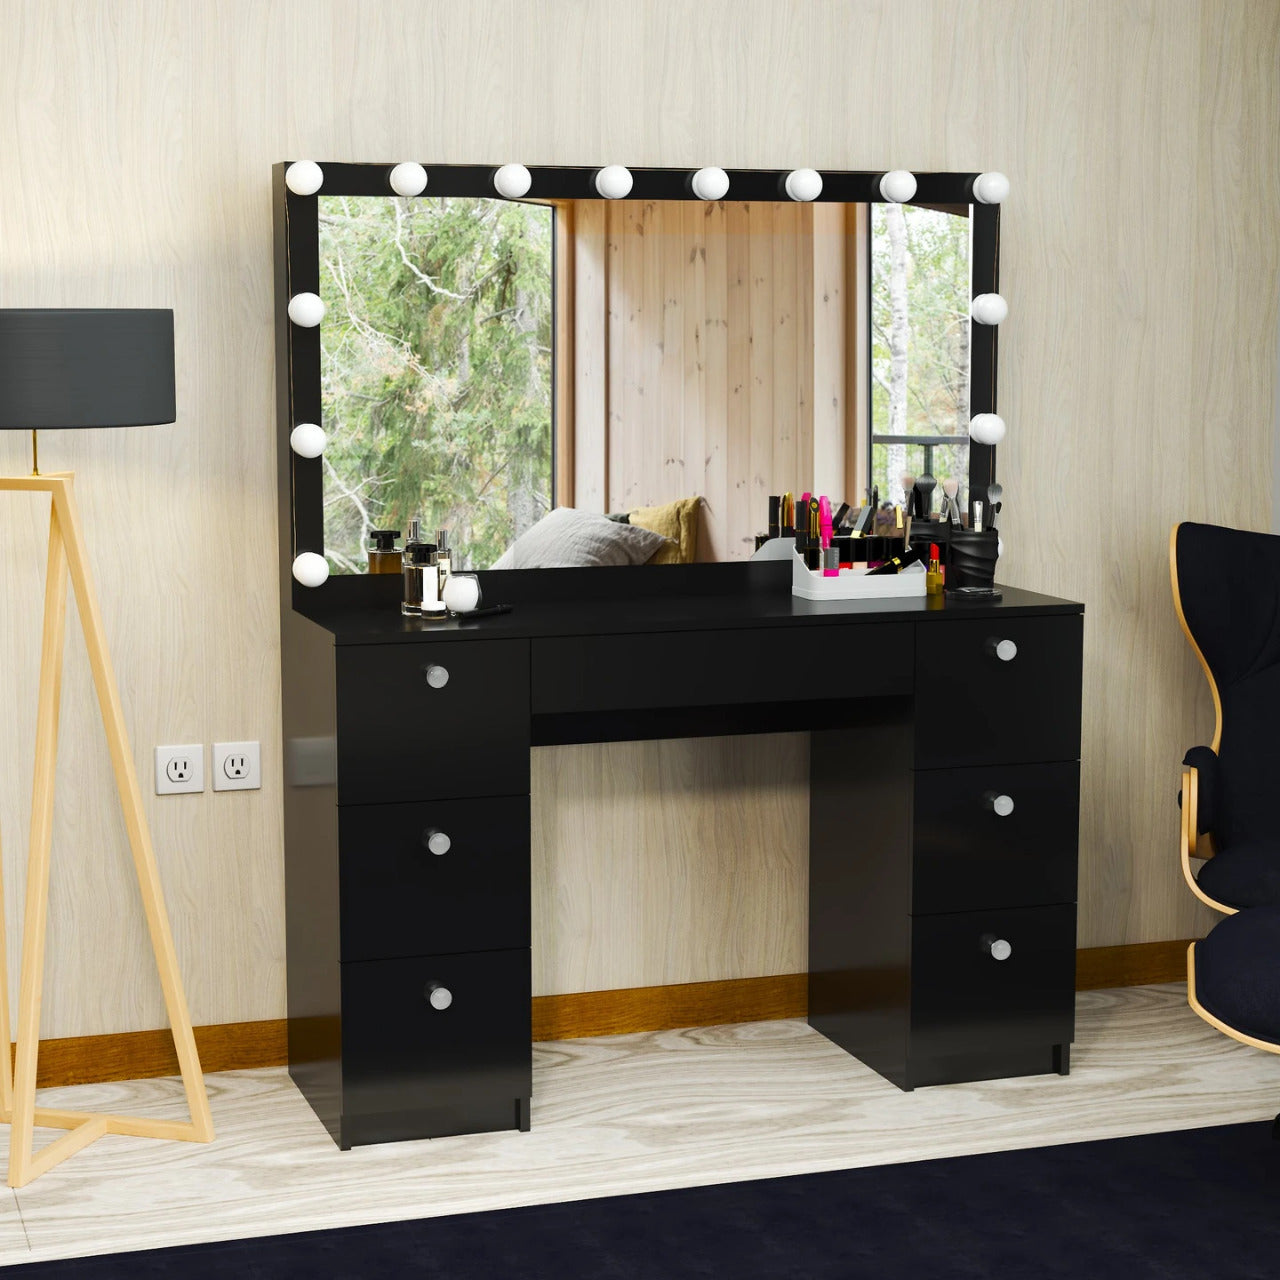 Tips For Choosing the Perfect Vanity Dressing Table